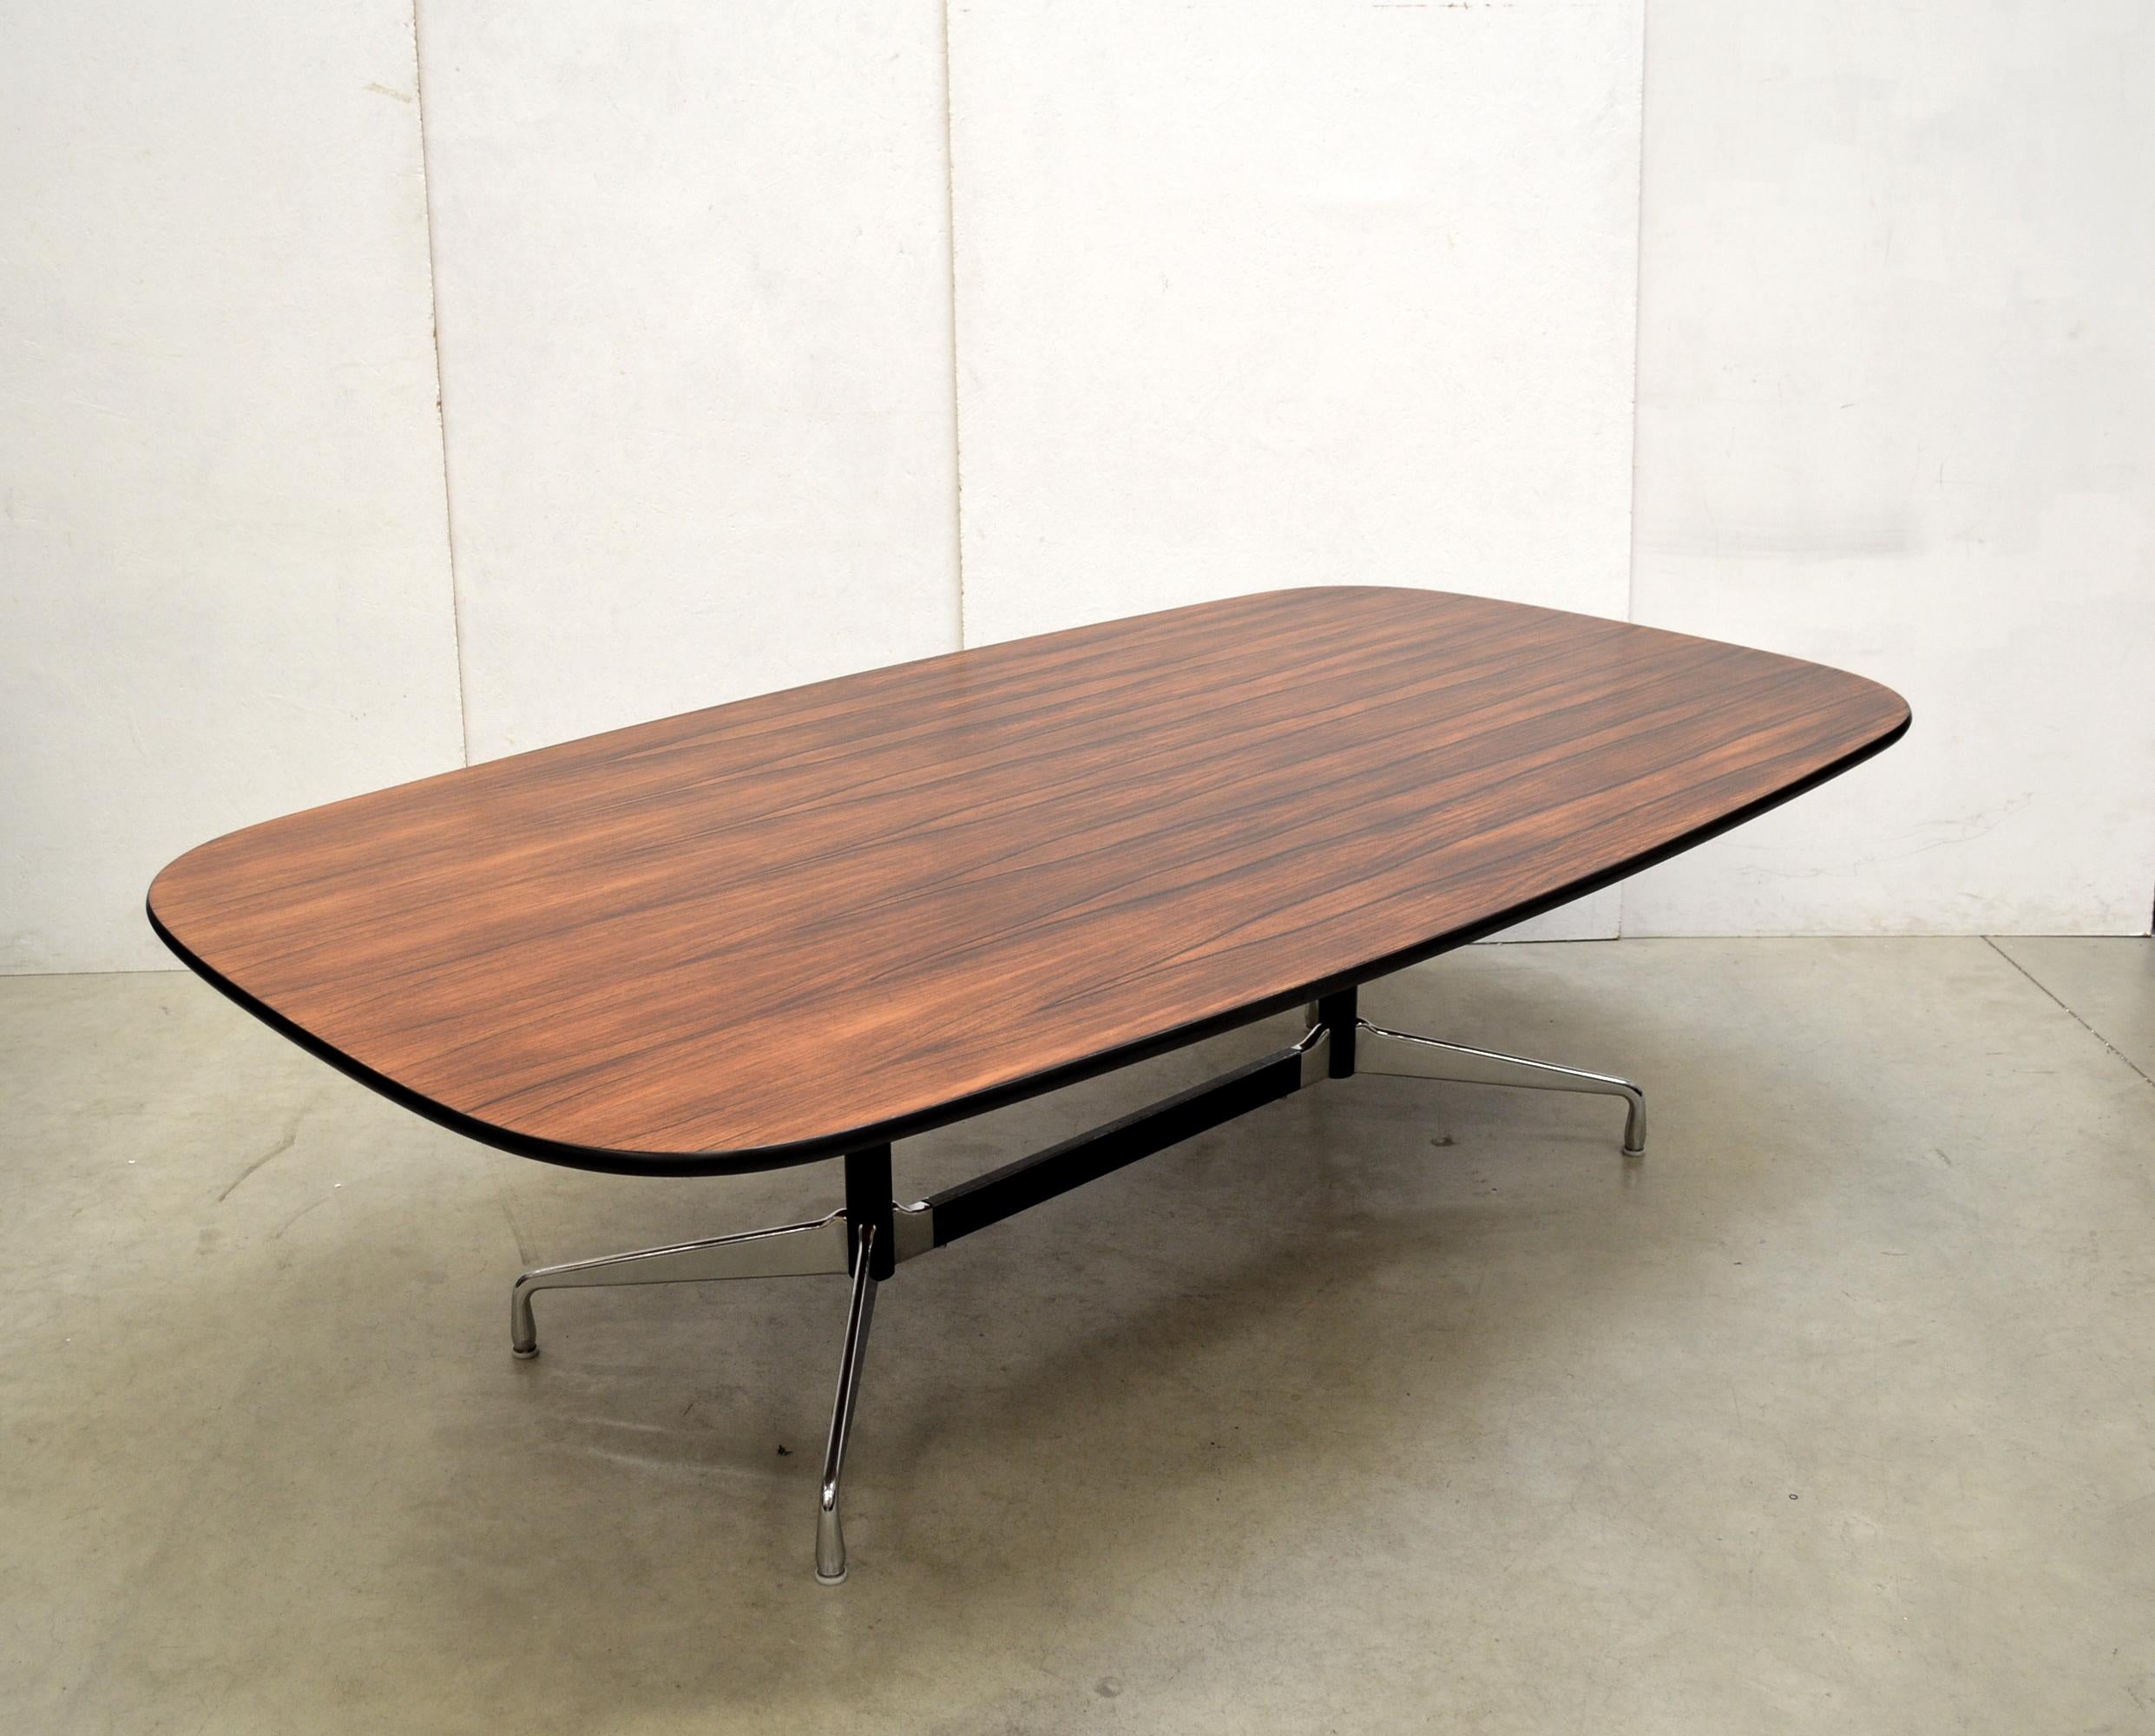 Fine and rare segmented table by Charles Eames for Herman Miller with 8x superb Cognac Leather chairs model EA107 produced by Vitra. The chairs features a chromed aluminium frame and are all made between 1994 - 1998.
It is the premium edition which